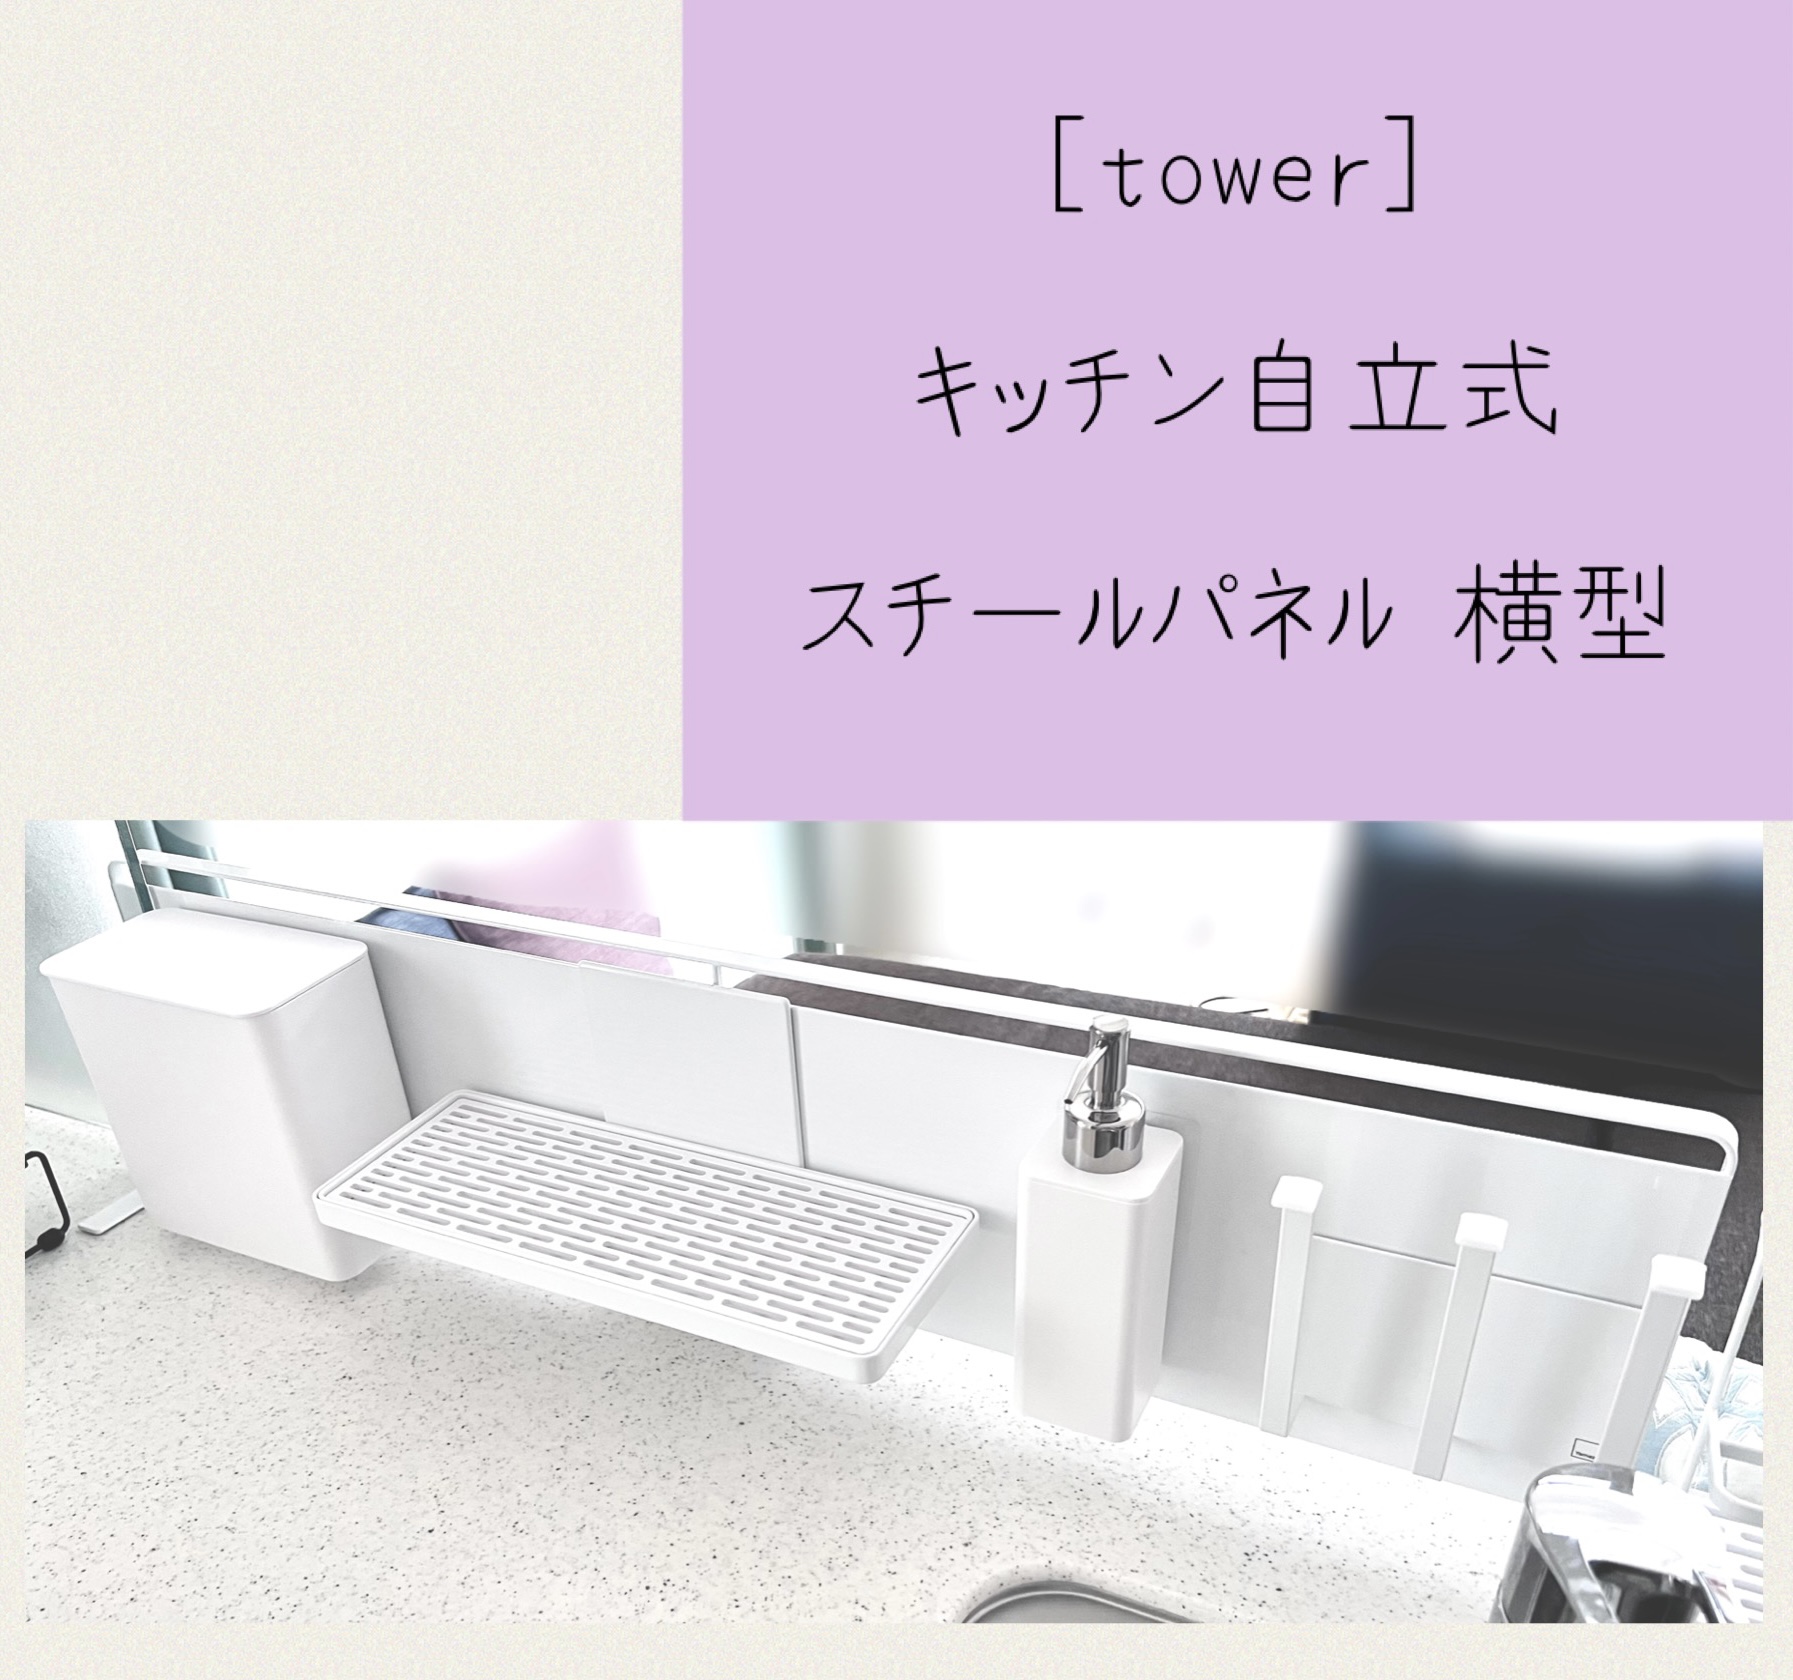 You are currently viewing tower [山崎実業] キッチン自立式スチールパネル 横型 でストレスフリー